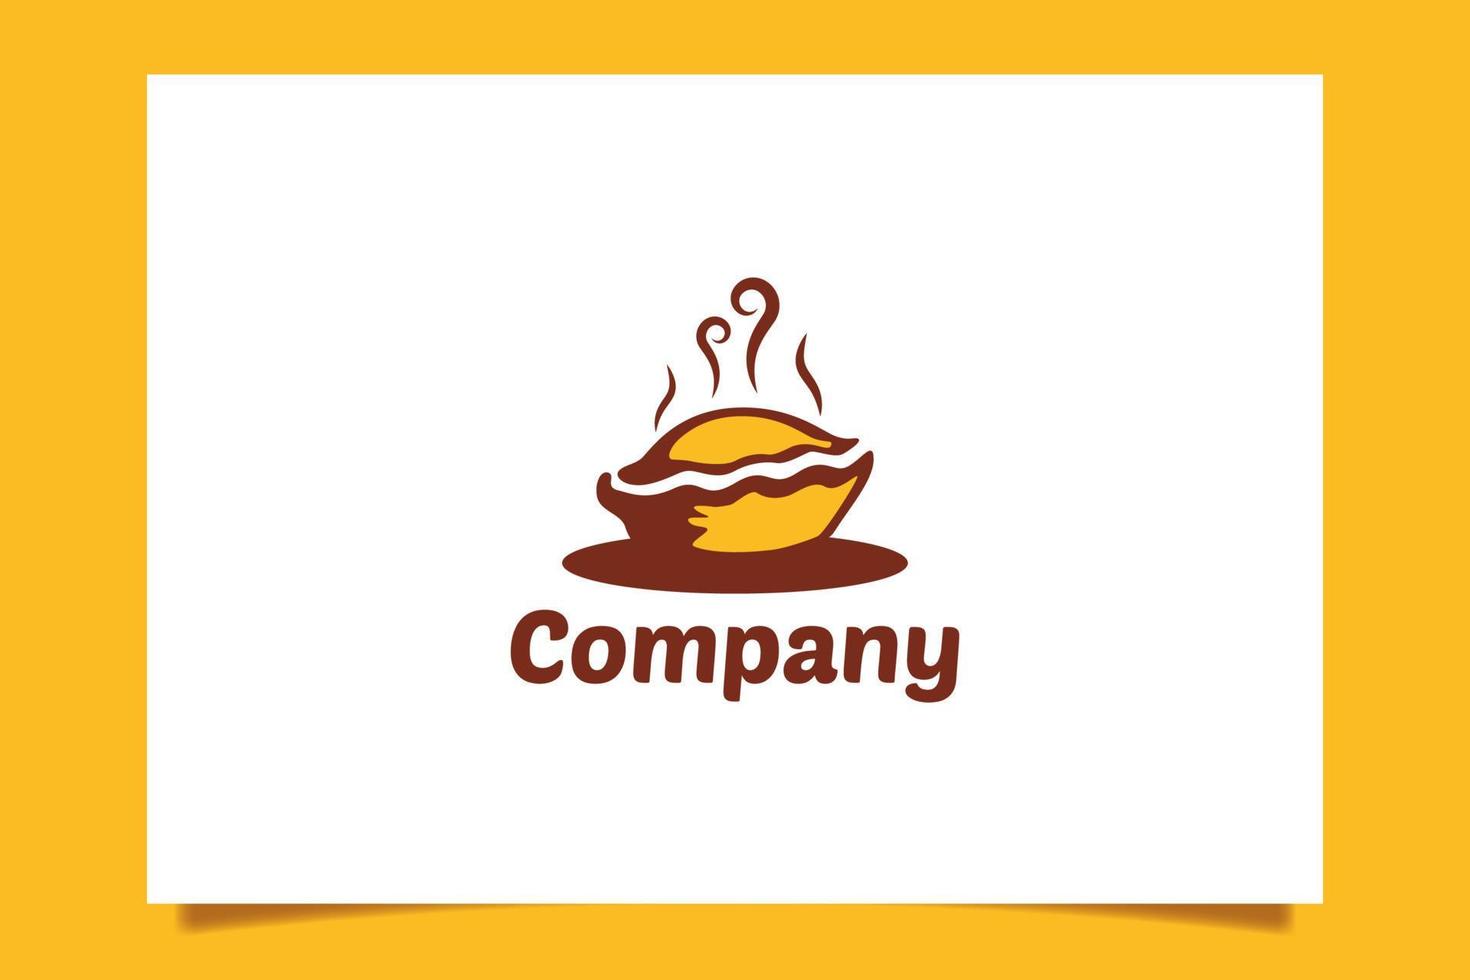 pie logo for any business especially for food and beverage, restaurant, cafe, etc. vector